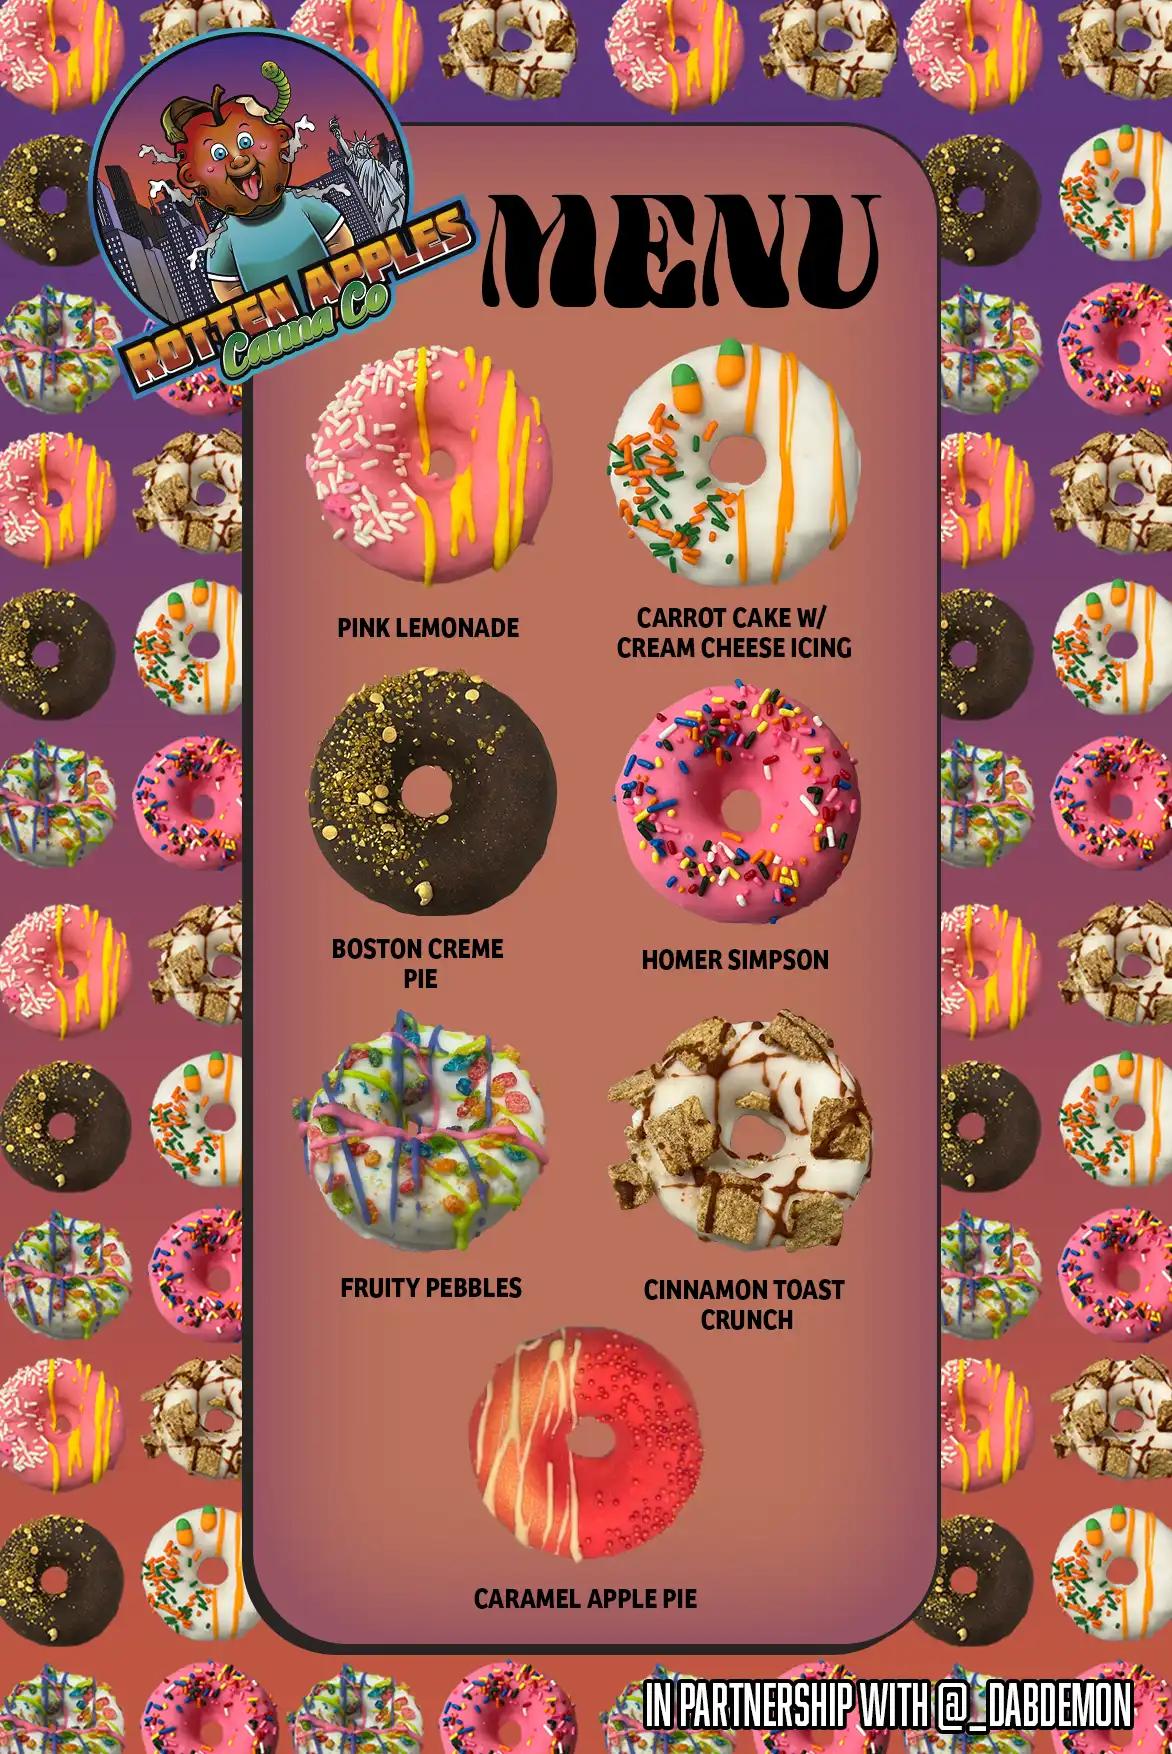 Rotten Apples Canna Co.'s donut menu in collaboration with _dabdemon including seven donuts, the Pink Lemonade Donut, Carrot Cake with Cream Cheese Icing donut, Boston Cream Pie Donut, Homer Simpson Donut, Fruity Pebbles Donut, Cinnamon Toast Crunch Donut, and the Caramel Apple Pie Donut.